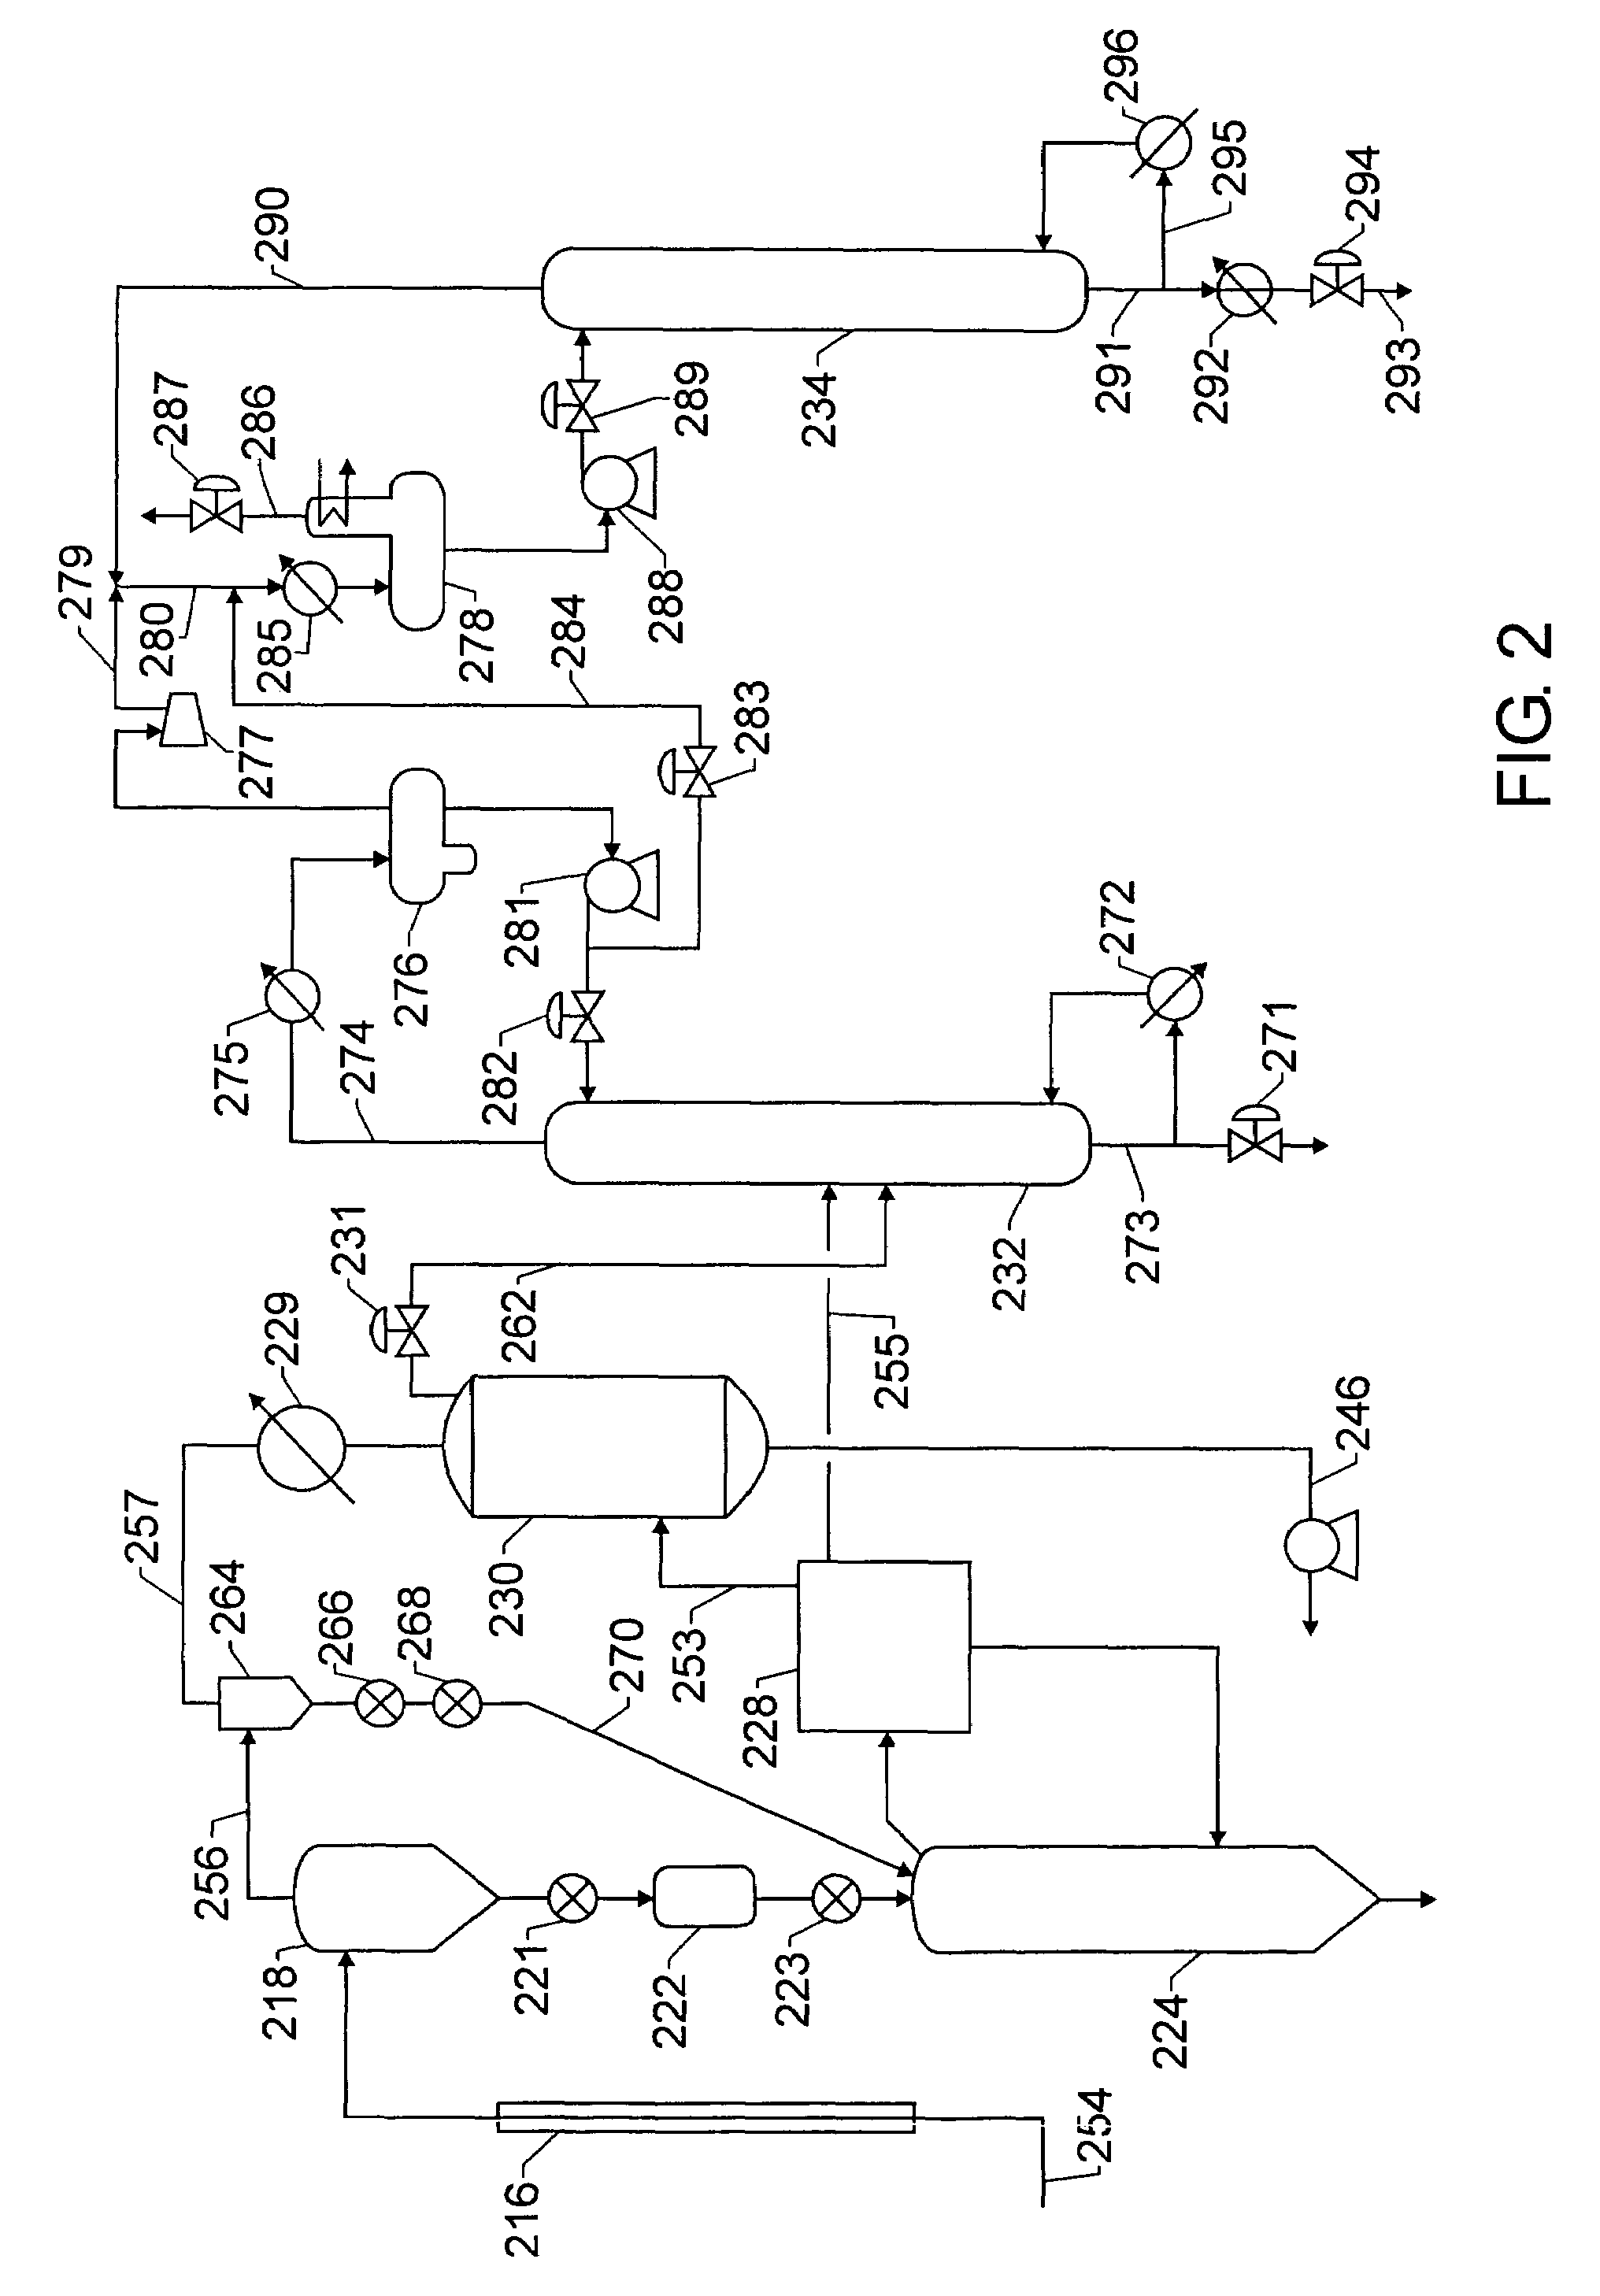 Process and apparatus for separating polymer solids, hydrocarbon fluids, and purge gas